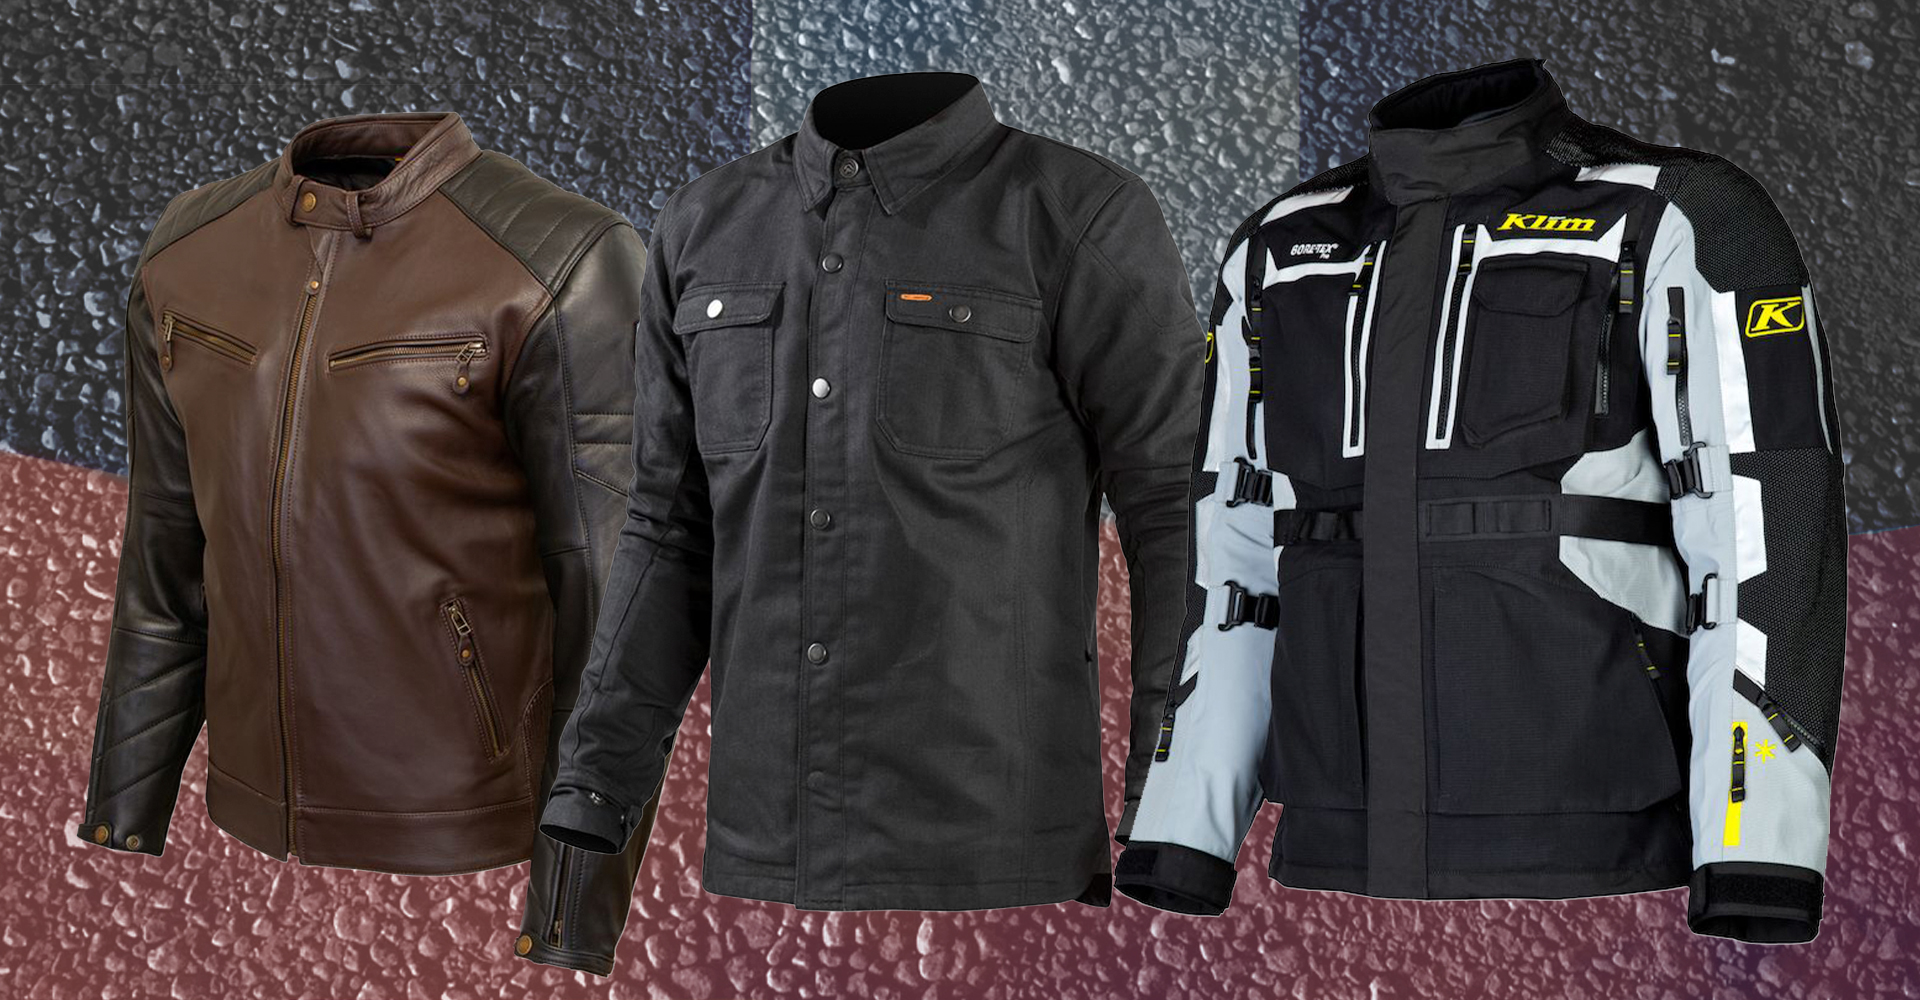 The 10 Best Motorcycle Jackets for Men [2021]